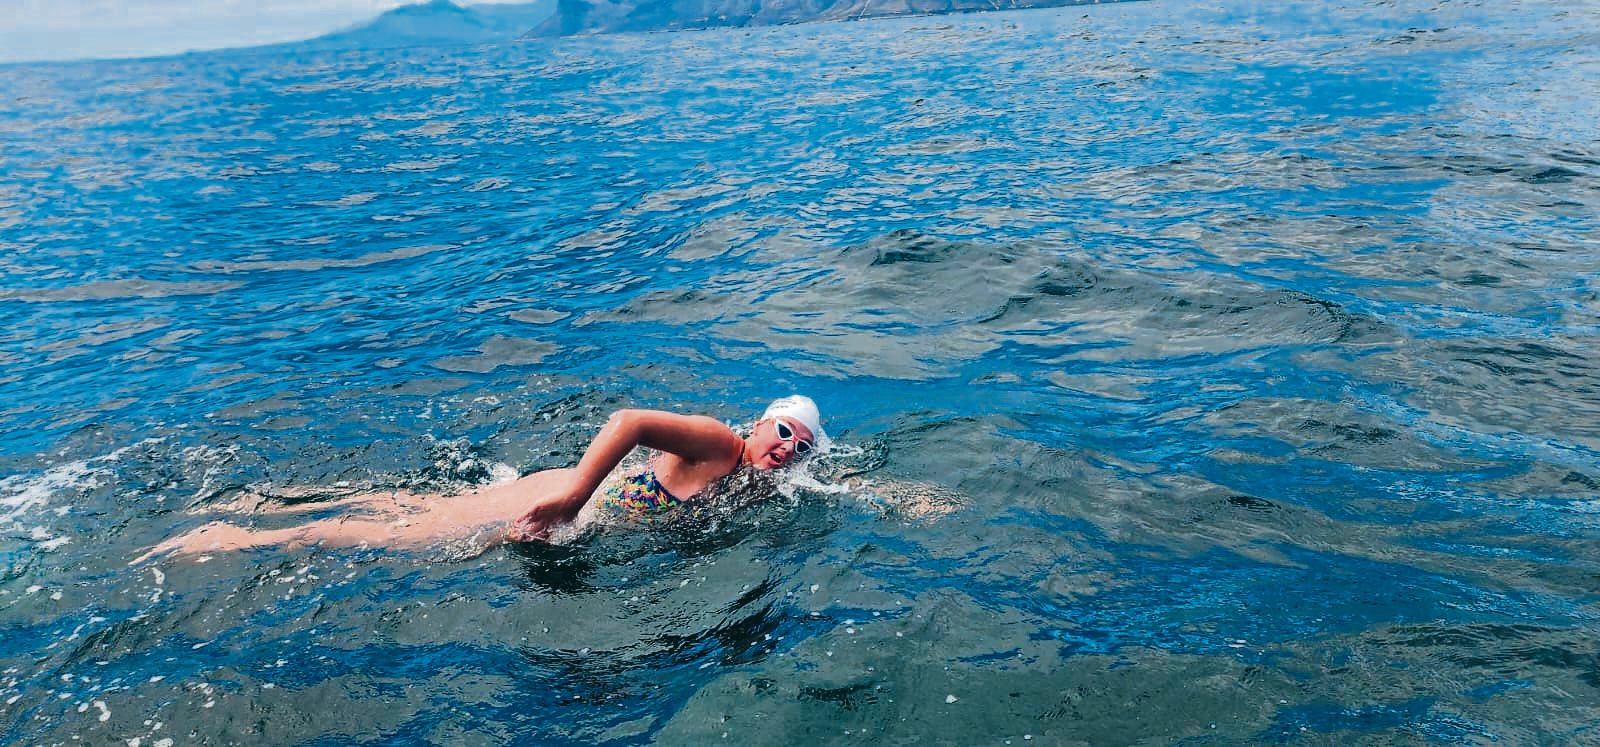 Amber-Rose (16) completed the swim in just over 9 hours. PHOTO: Supplied